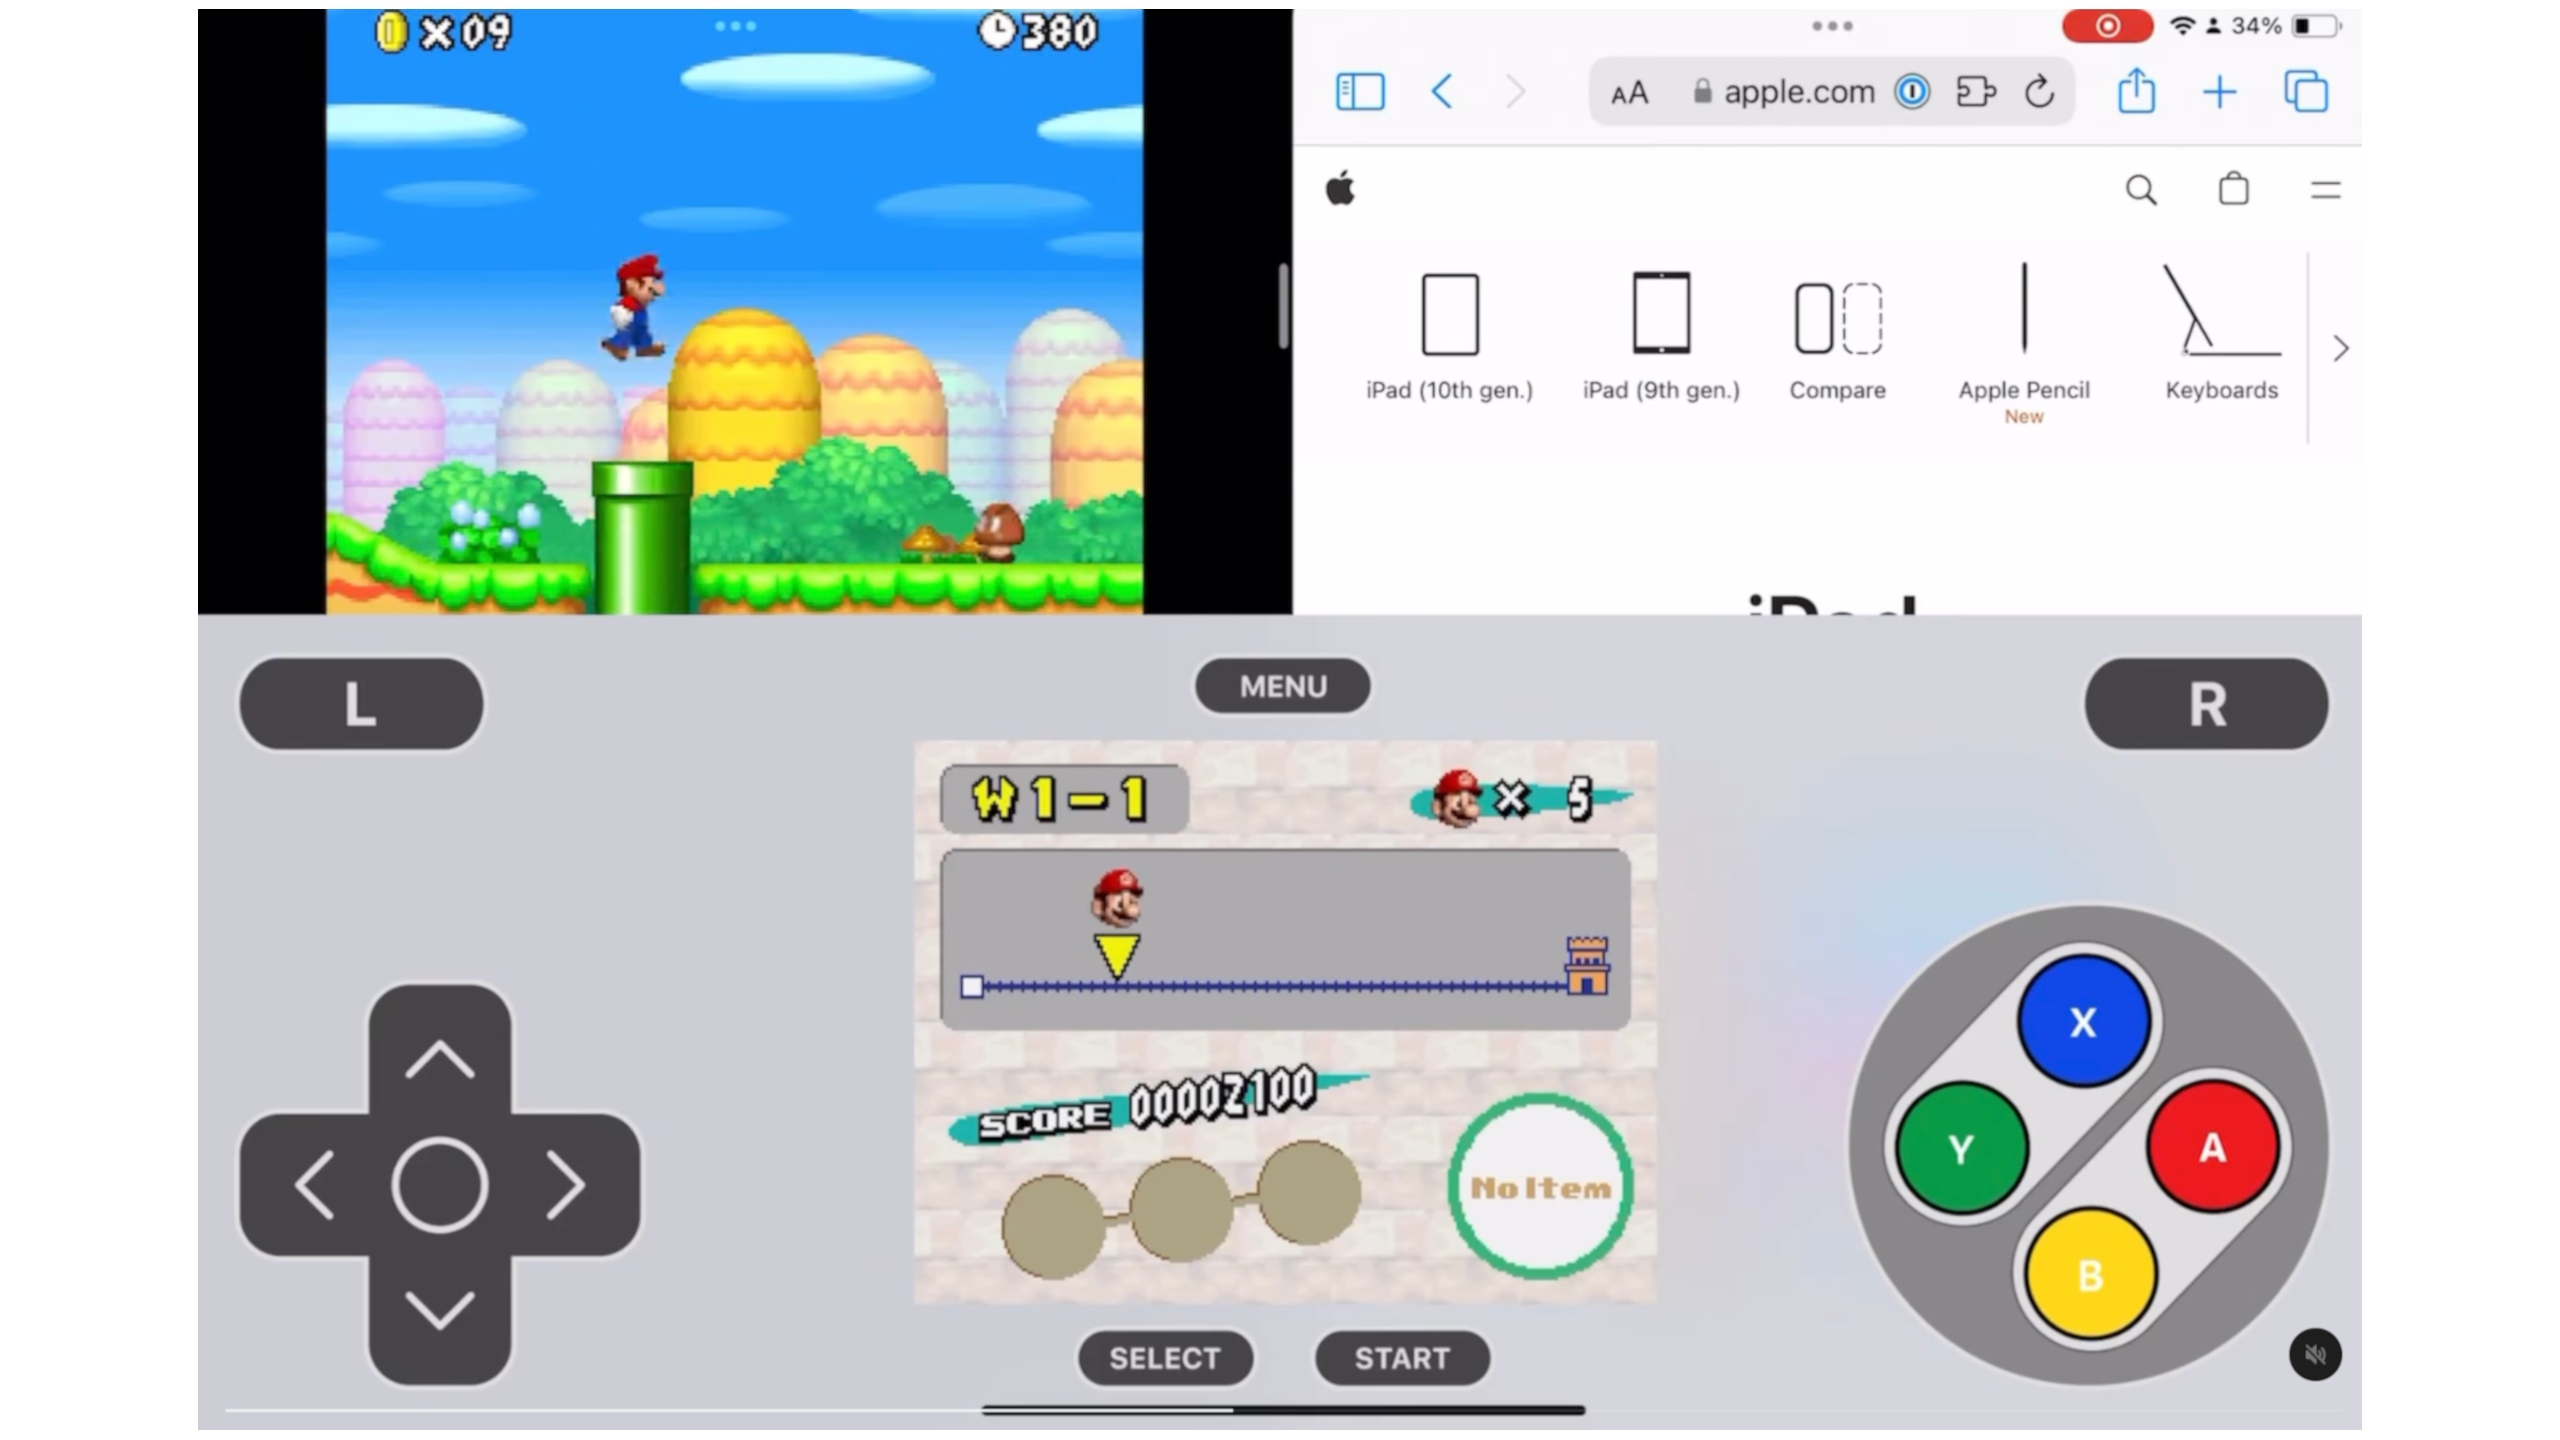 The Delta emulator is coming to iPad